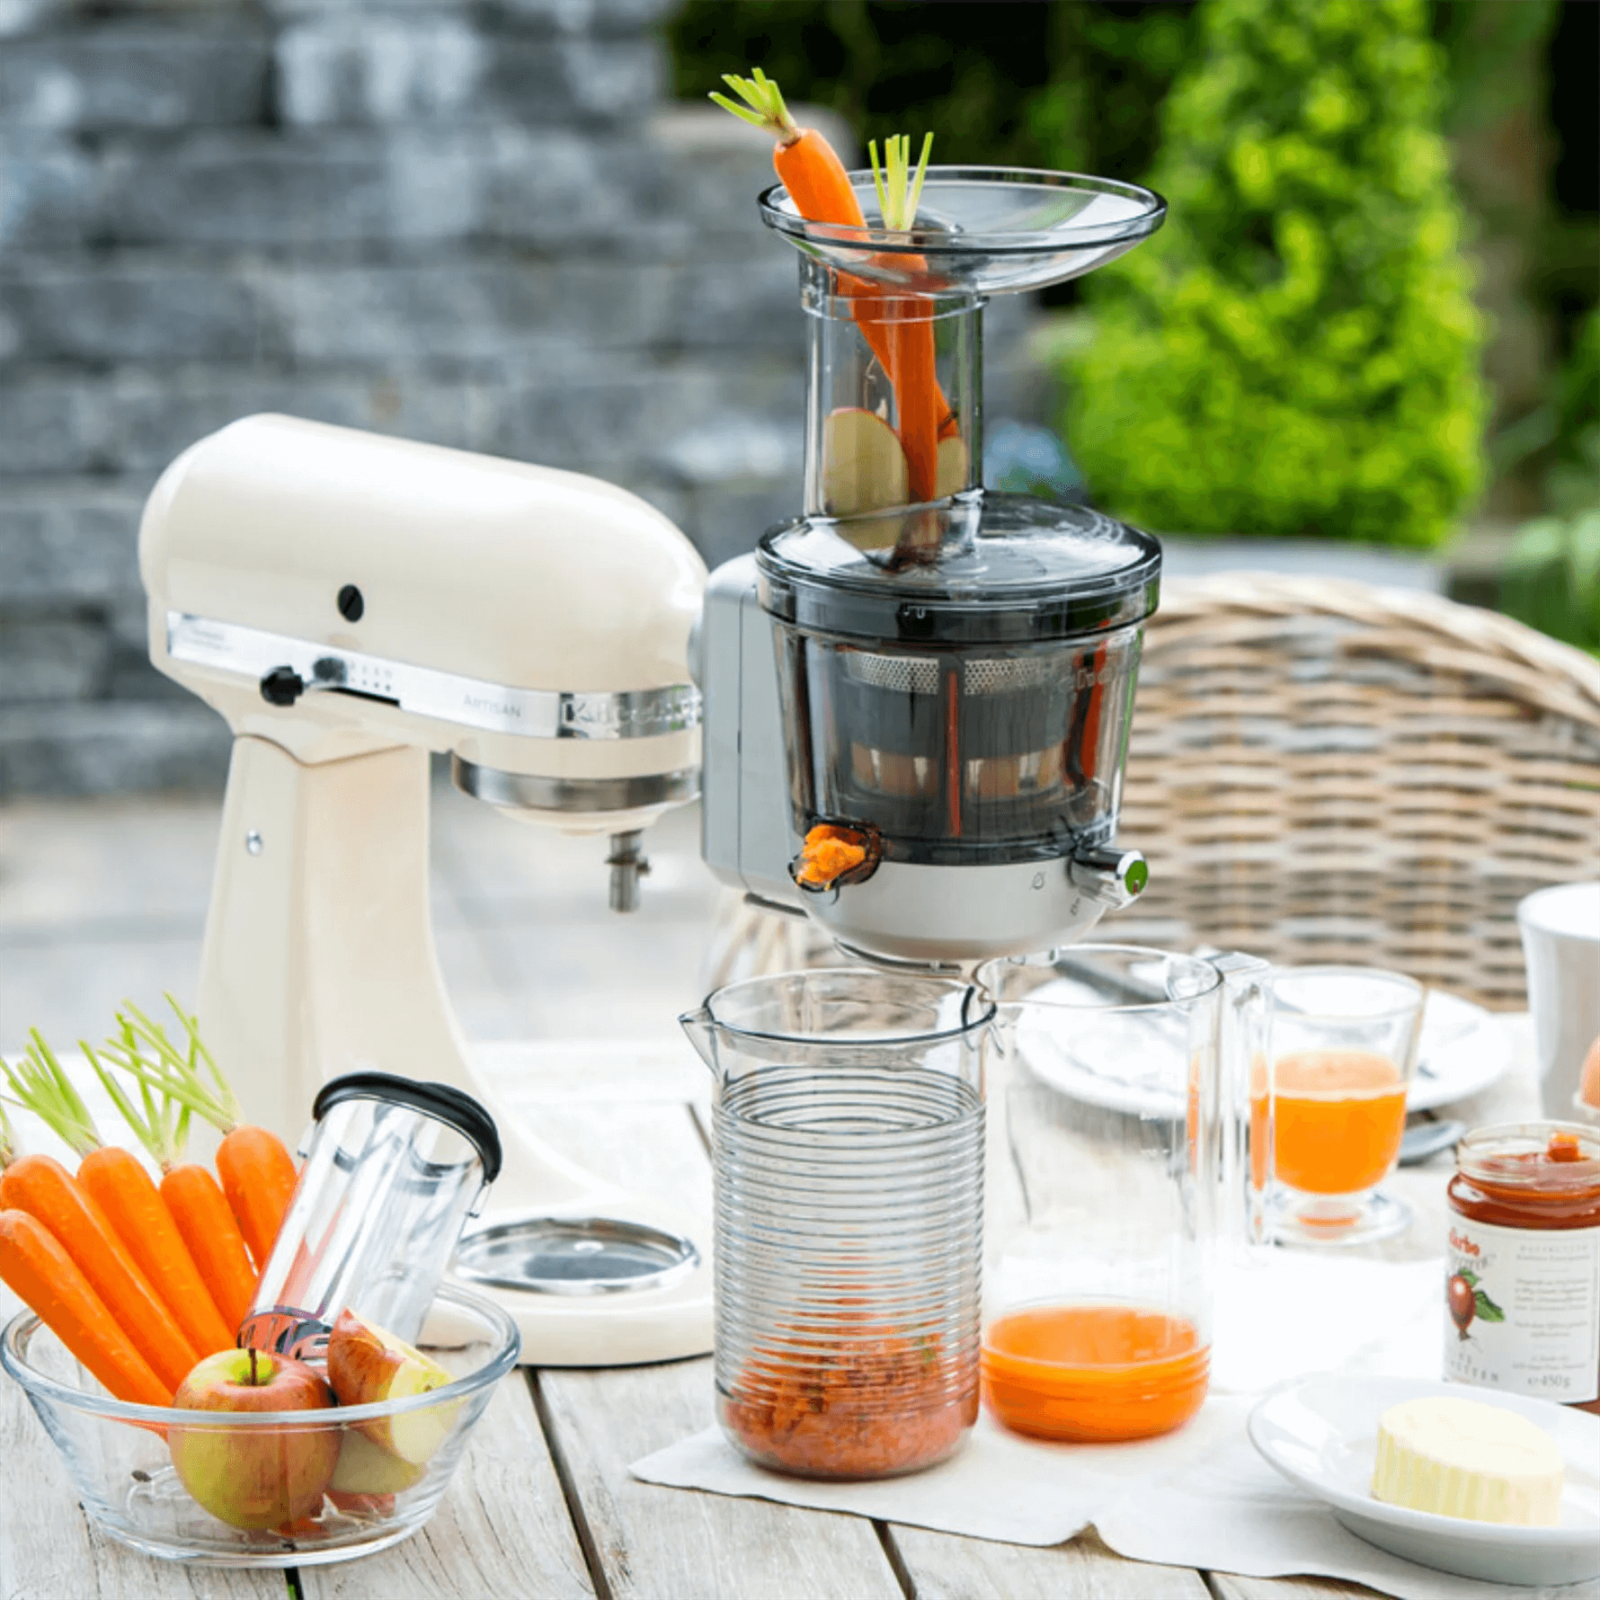 Stay ahead of the curve with 2024's best juicers. Compare features, efficiency, and ease of use to choose the perfect juicer for your health journey.